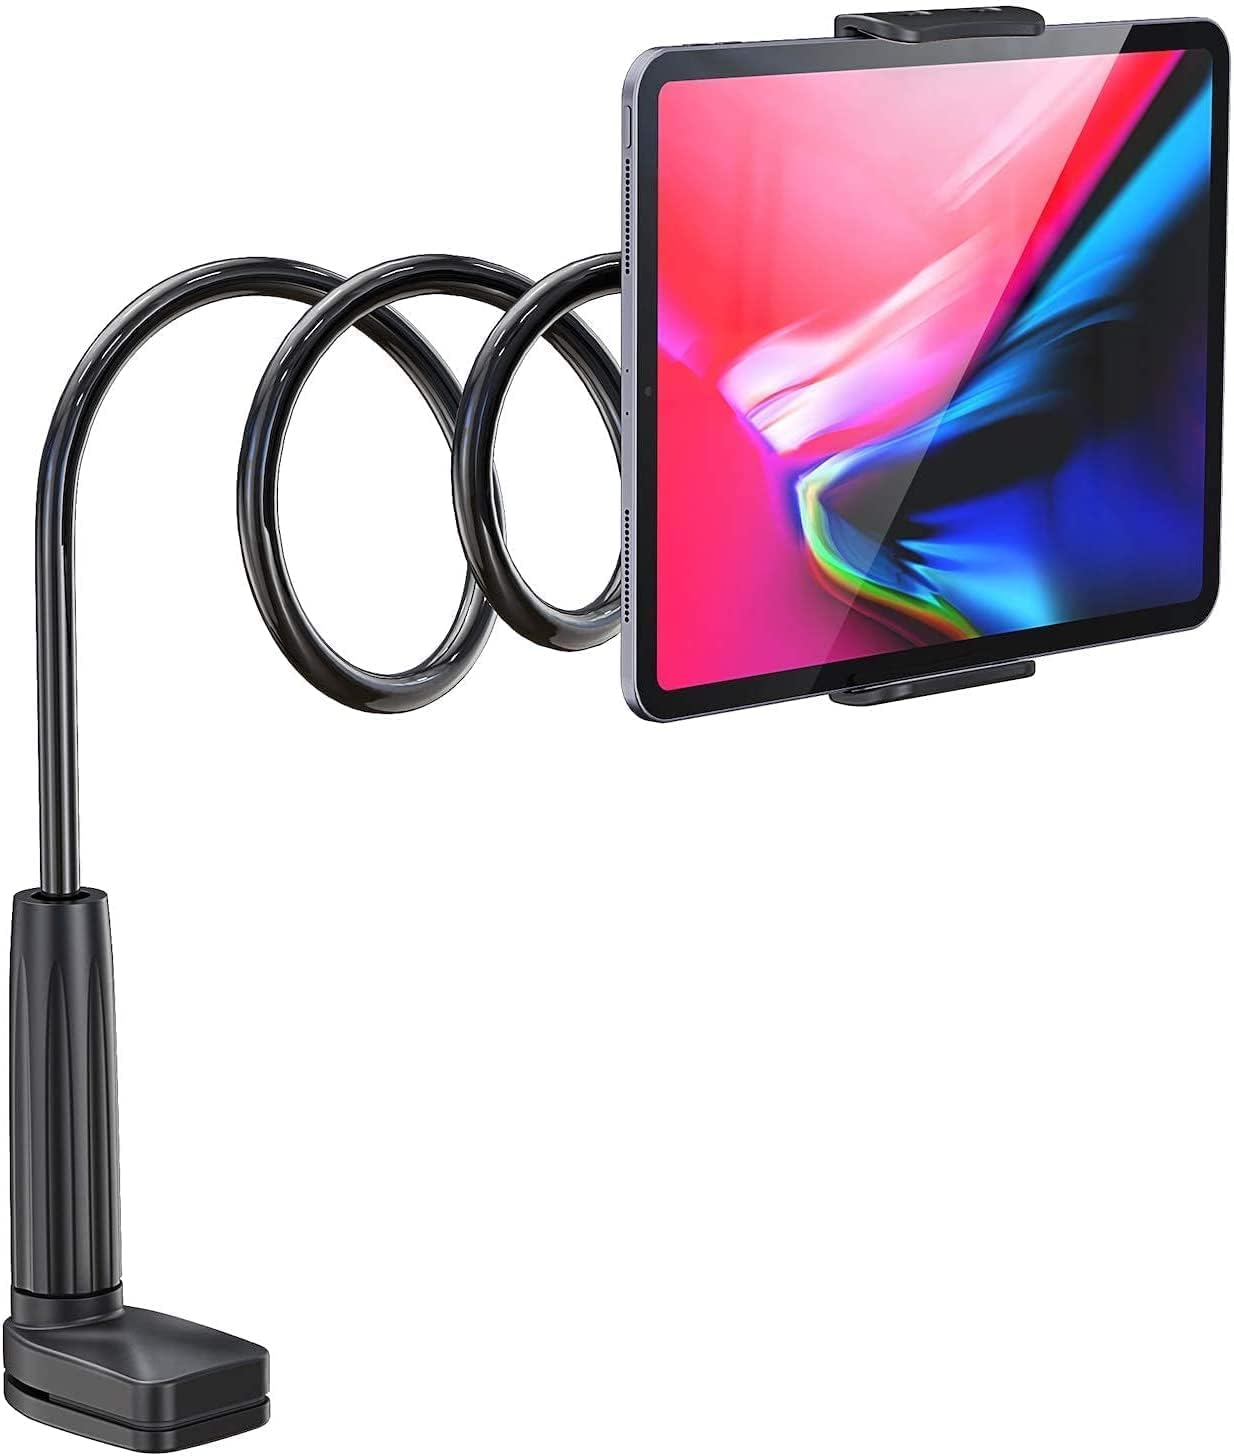 WixGear Tablet Holder Mount, Gooseneck Tablet Stand, Tablet Holder for Table Top, Holder for Bed Couch Stand, Compatible with iPads, Samsung Galaxy Tablets, Amazon Fire HD and More